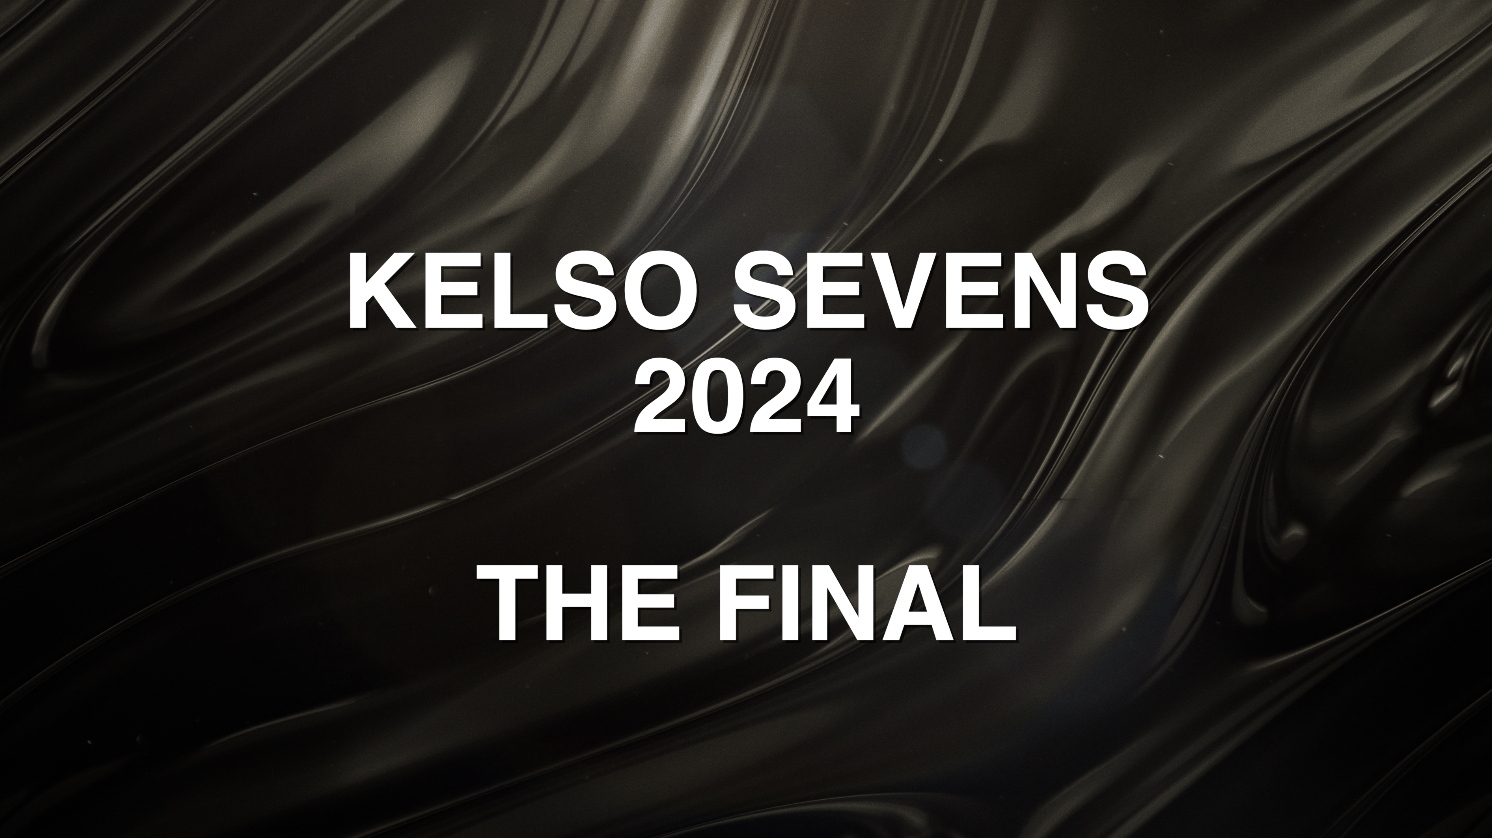 Kings of the Sevens